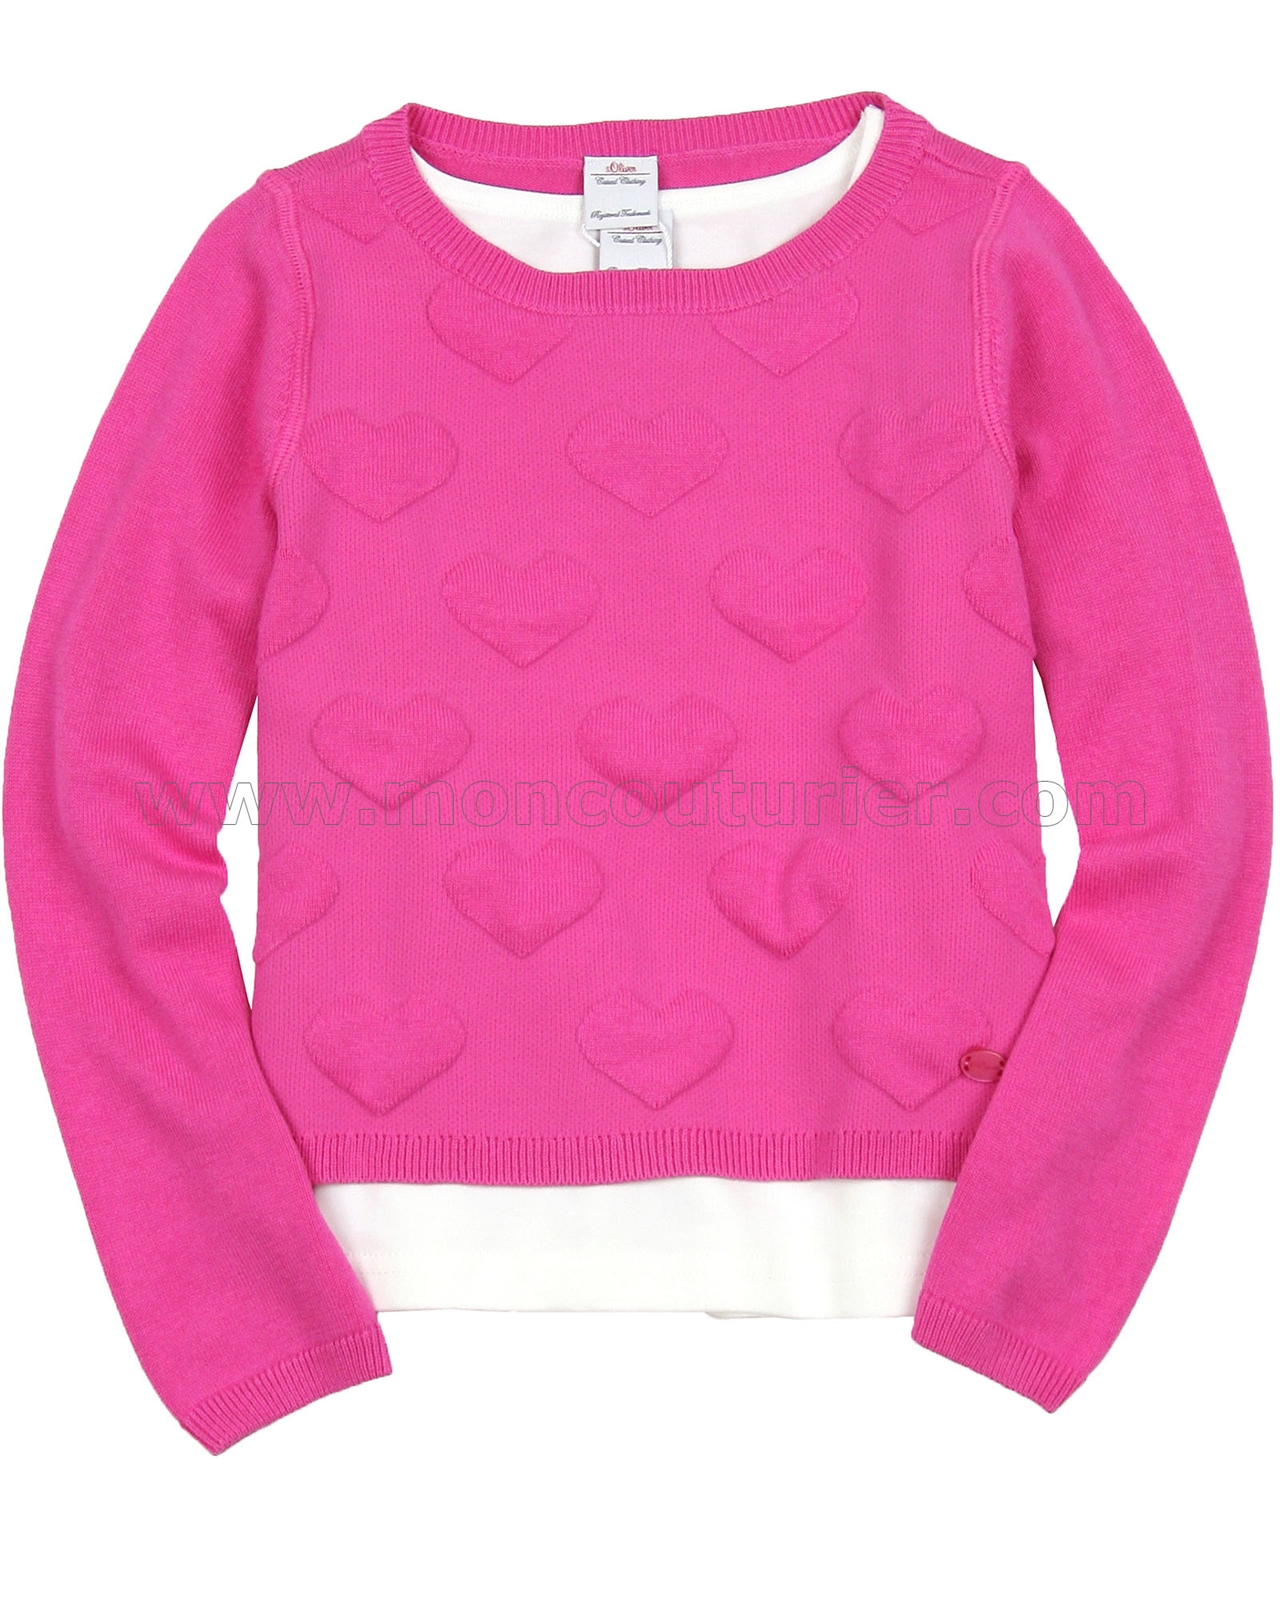 s.Oliver Baby Girls Sweater